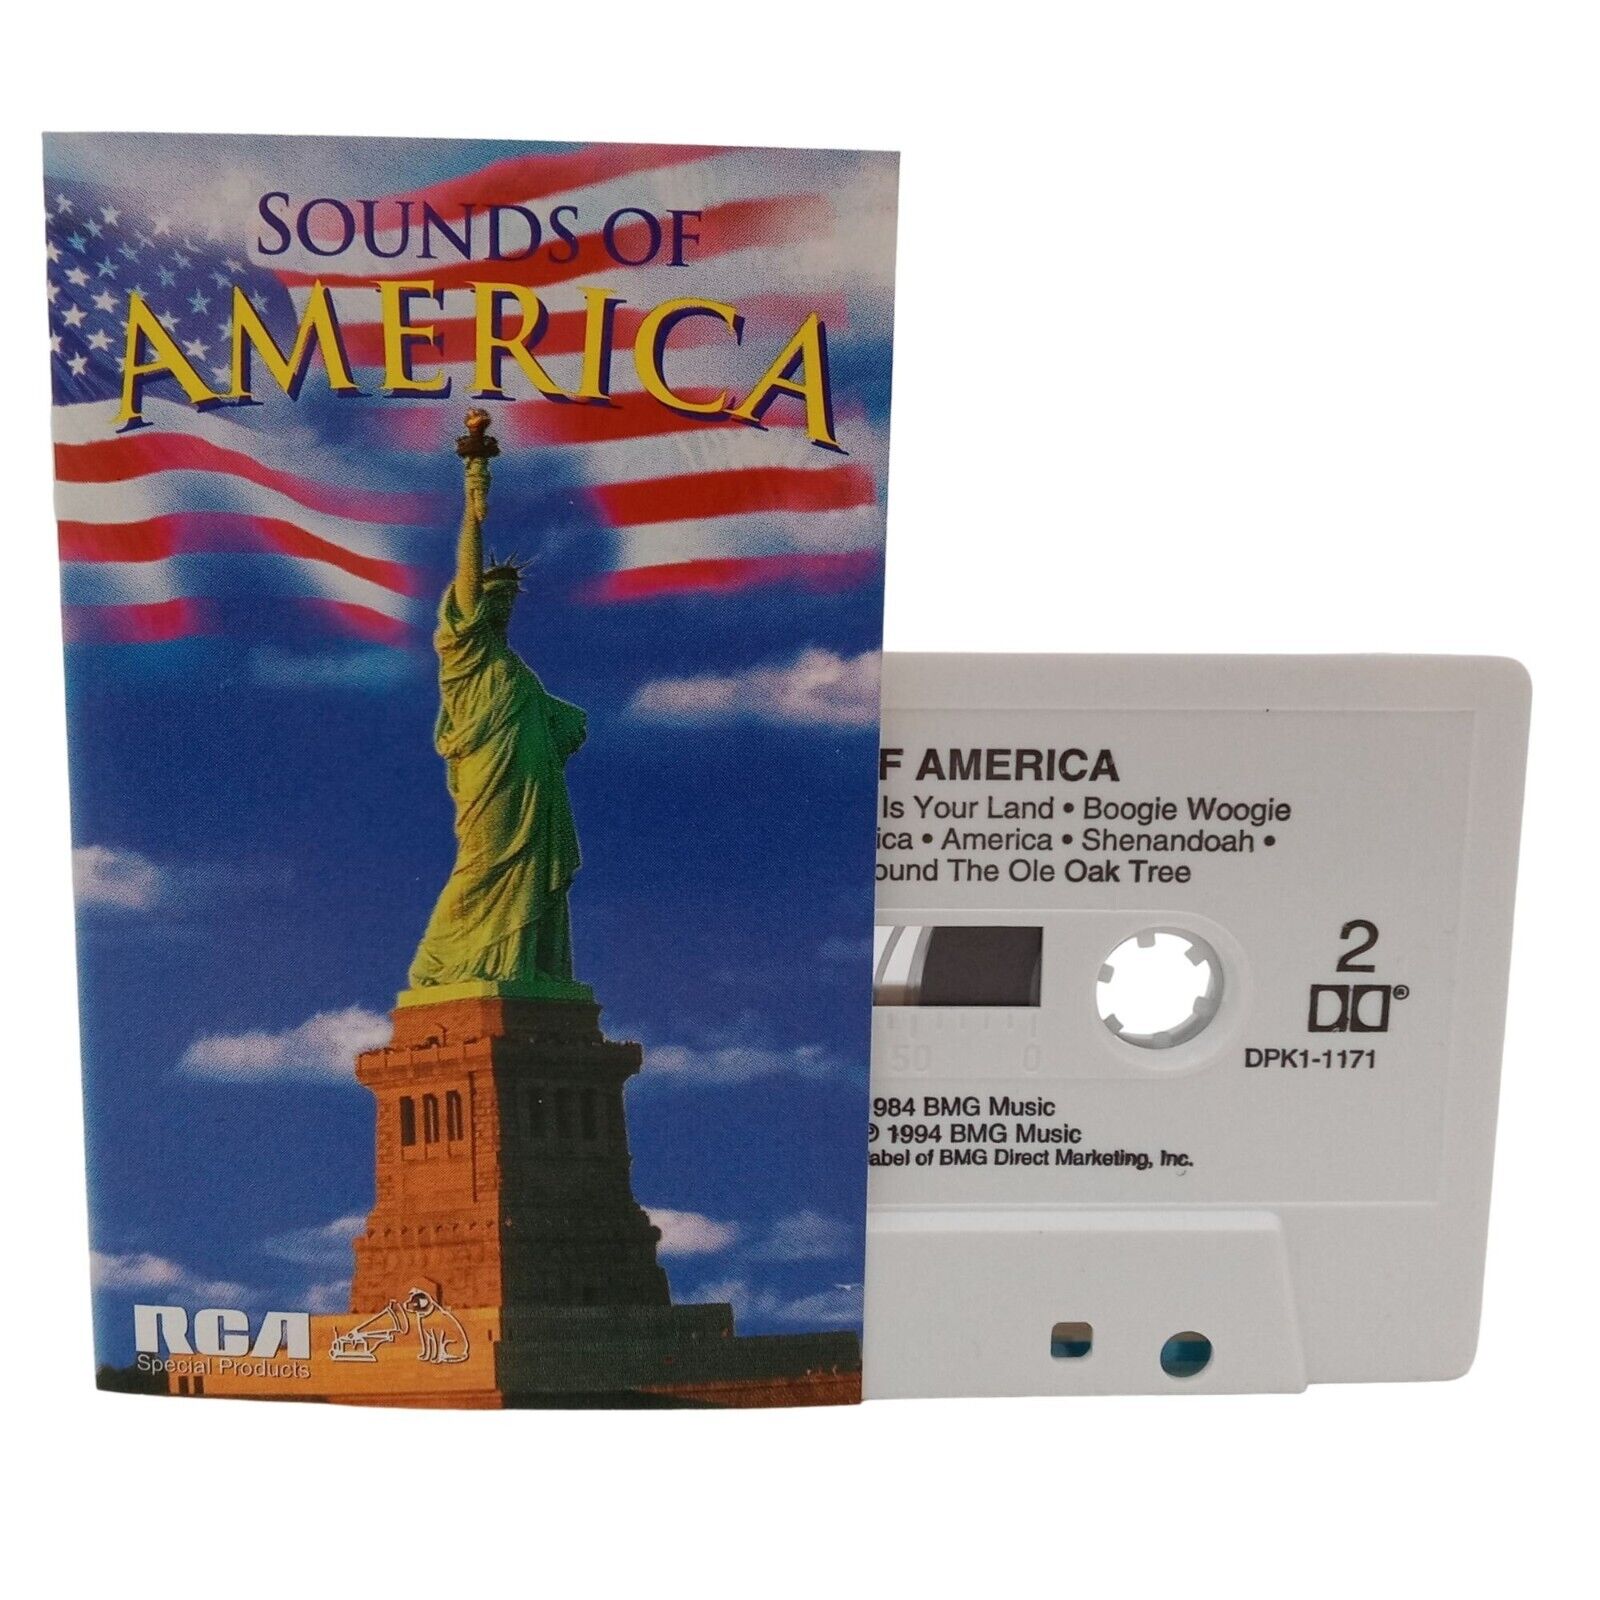 Sounds Of America Cassette Tape Vintage Patriotic American Music Statue Of Liber